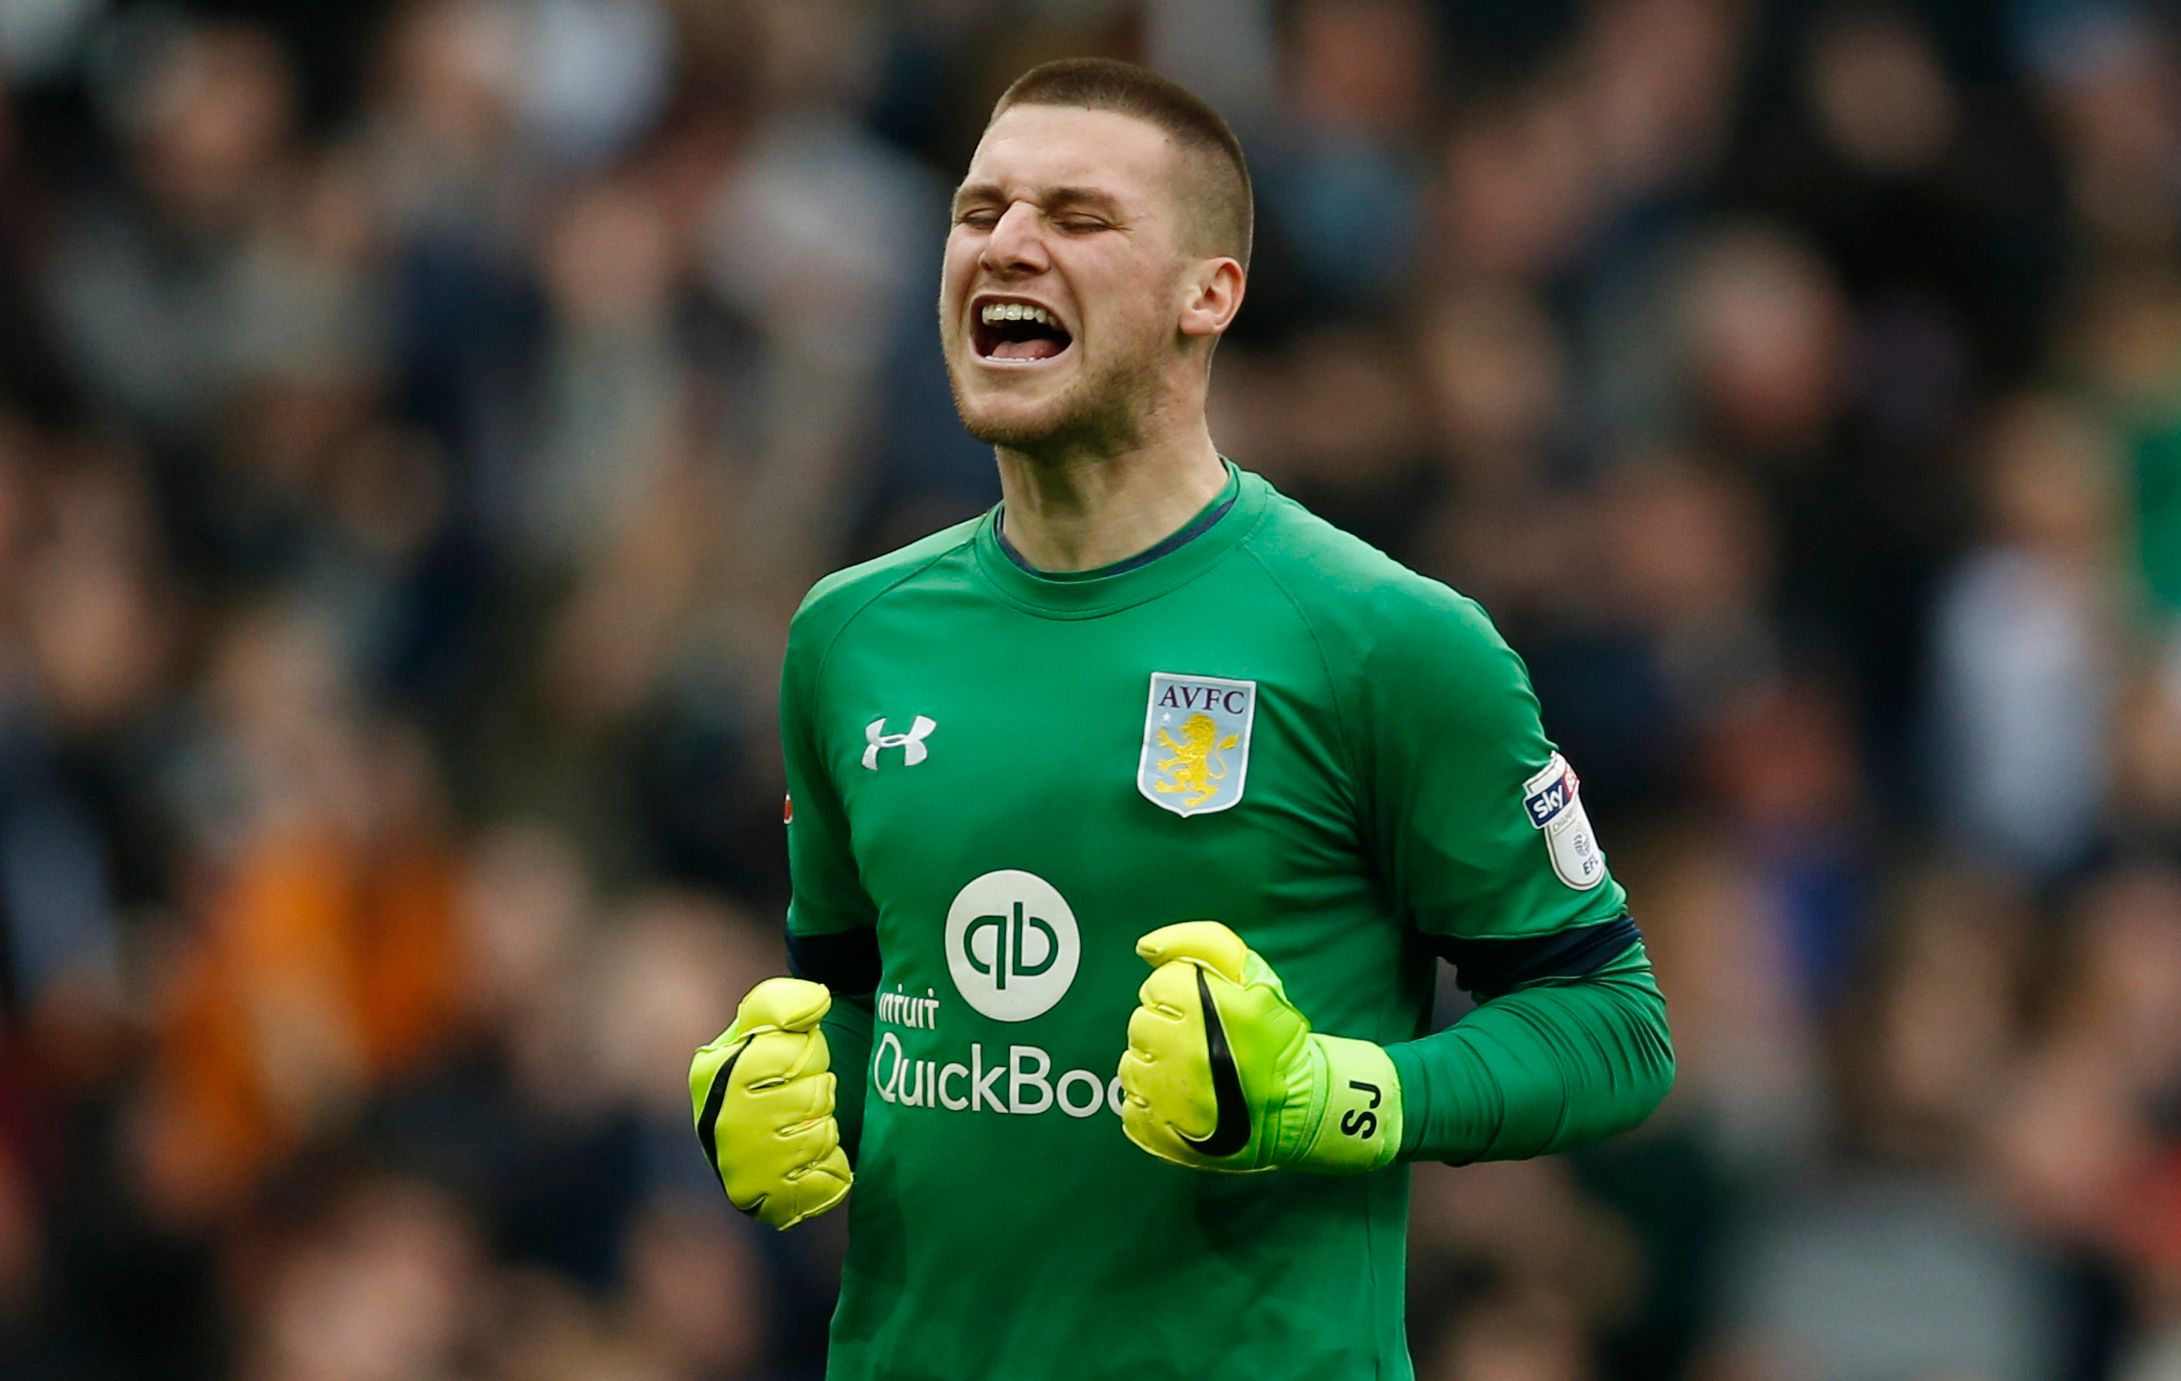 Britain Football Soccer - Aston Villa v Sheffield Wednesday - Sky Bet Championship - Villa Park - 11/3/17 Aston Villa’s Sam Johnstone celebrates after their second goal Mandatory Credit: Action Images / Andrew Boyers Livepic EDITORIAL USE ONLY. No use with unauthorized audio, video, data, fixture lists, club/league logos or 